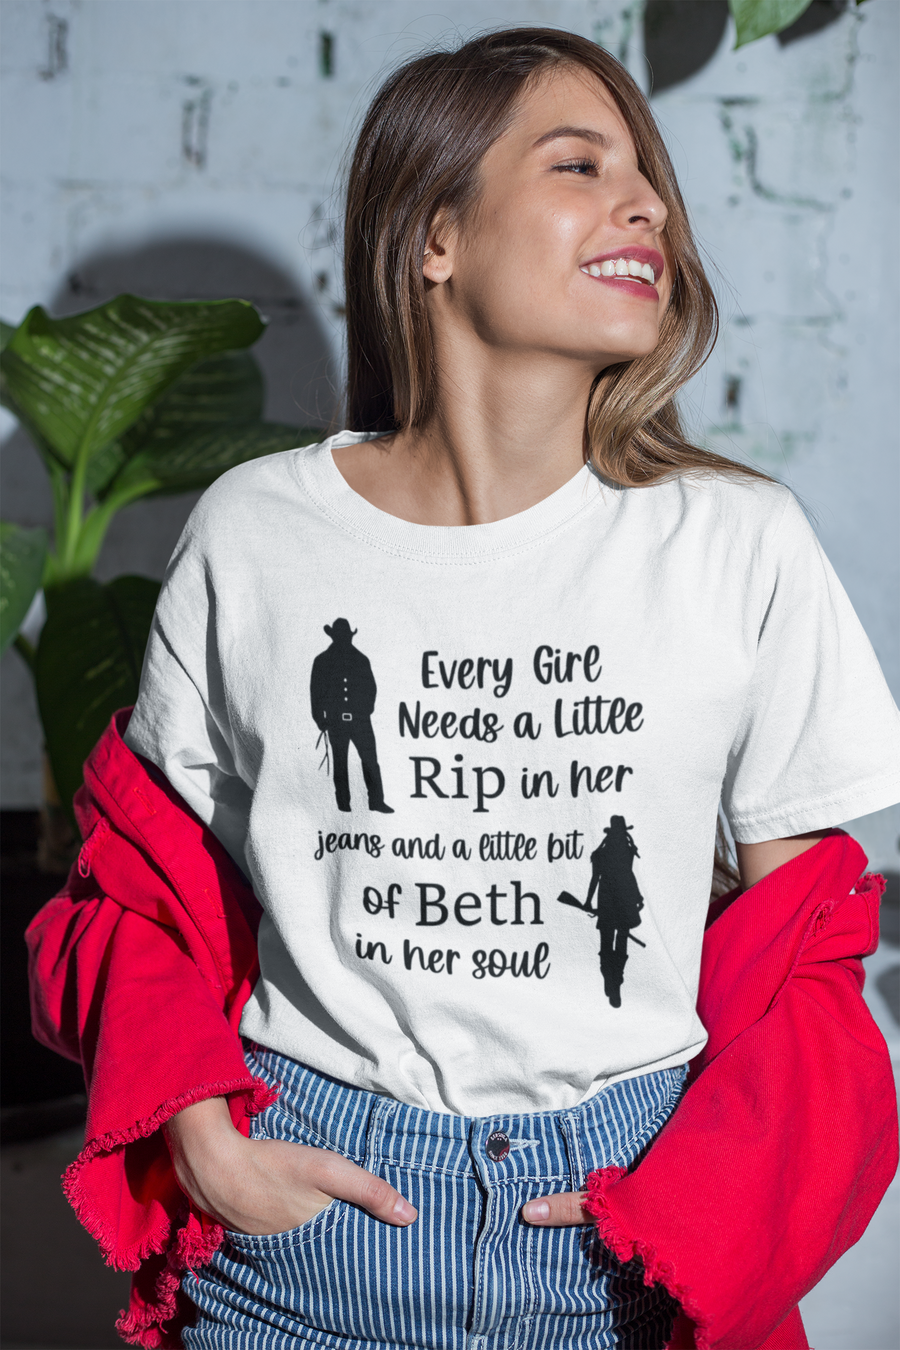 Every Girl Needs a Little Rip in Her Jeans and Beth in Her Soul (From Yellowstone) Adult Tee